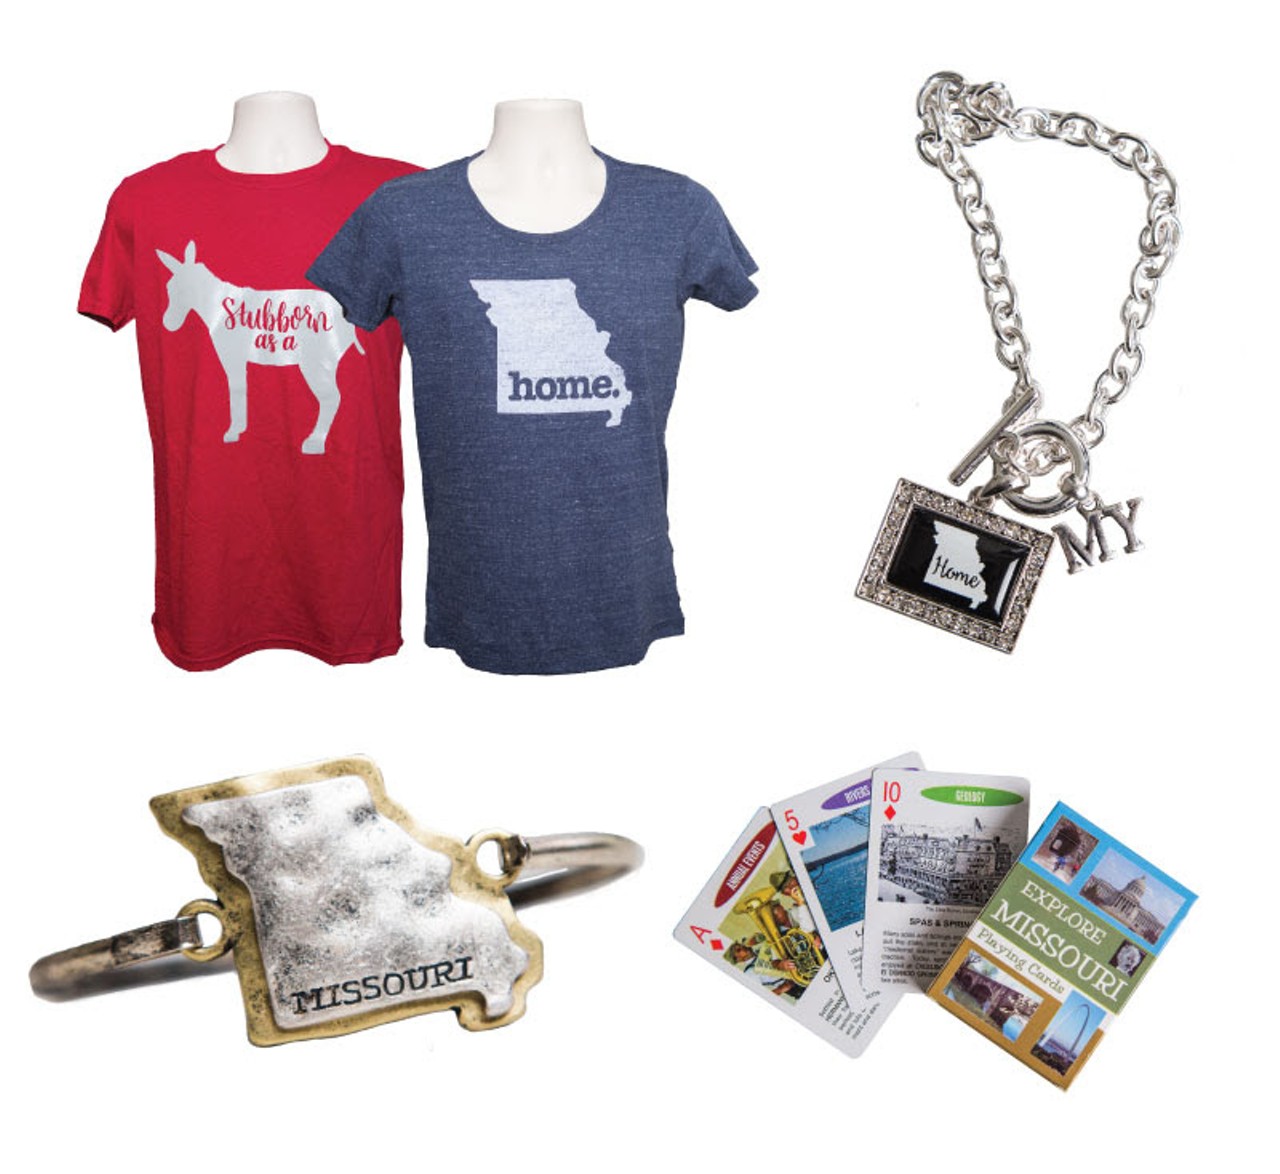 Missouri Life
You've likely seen Missouri Life magazine on bookstore shelves, but did you know that you can also buy merchandise through the company? From Missouri t-shirts to state-shaped jewelry to a cow-shaped cookie cutter (yes, really), these items encompass everything that makes Missouri the Show Me State.